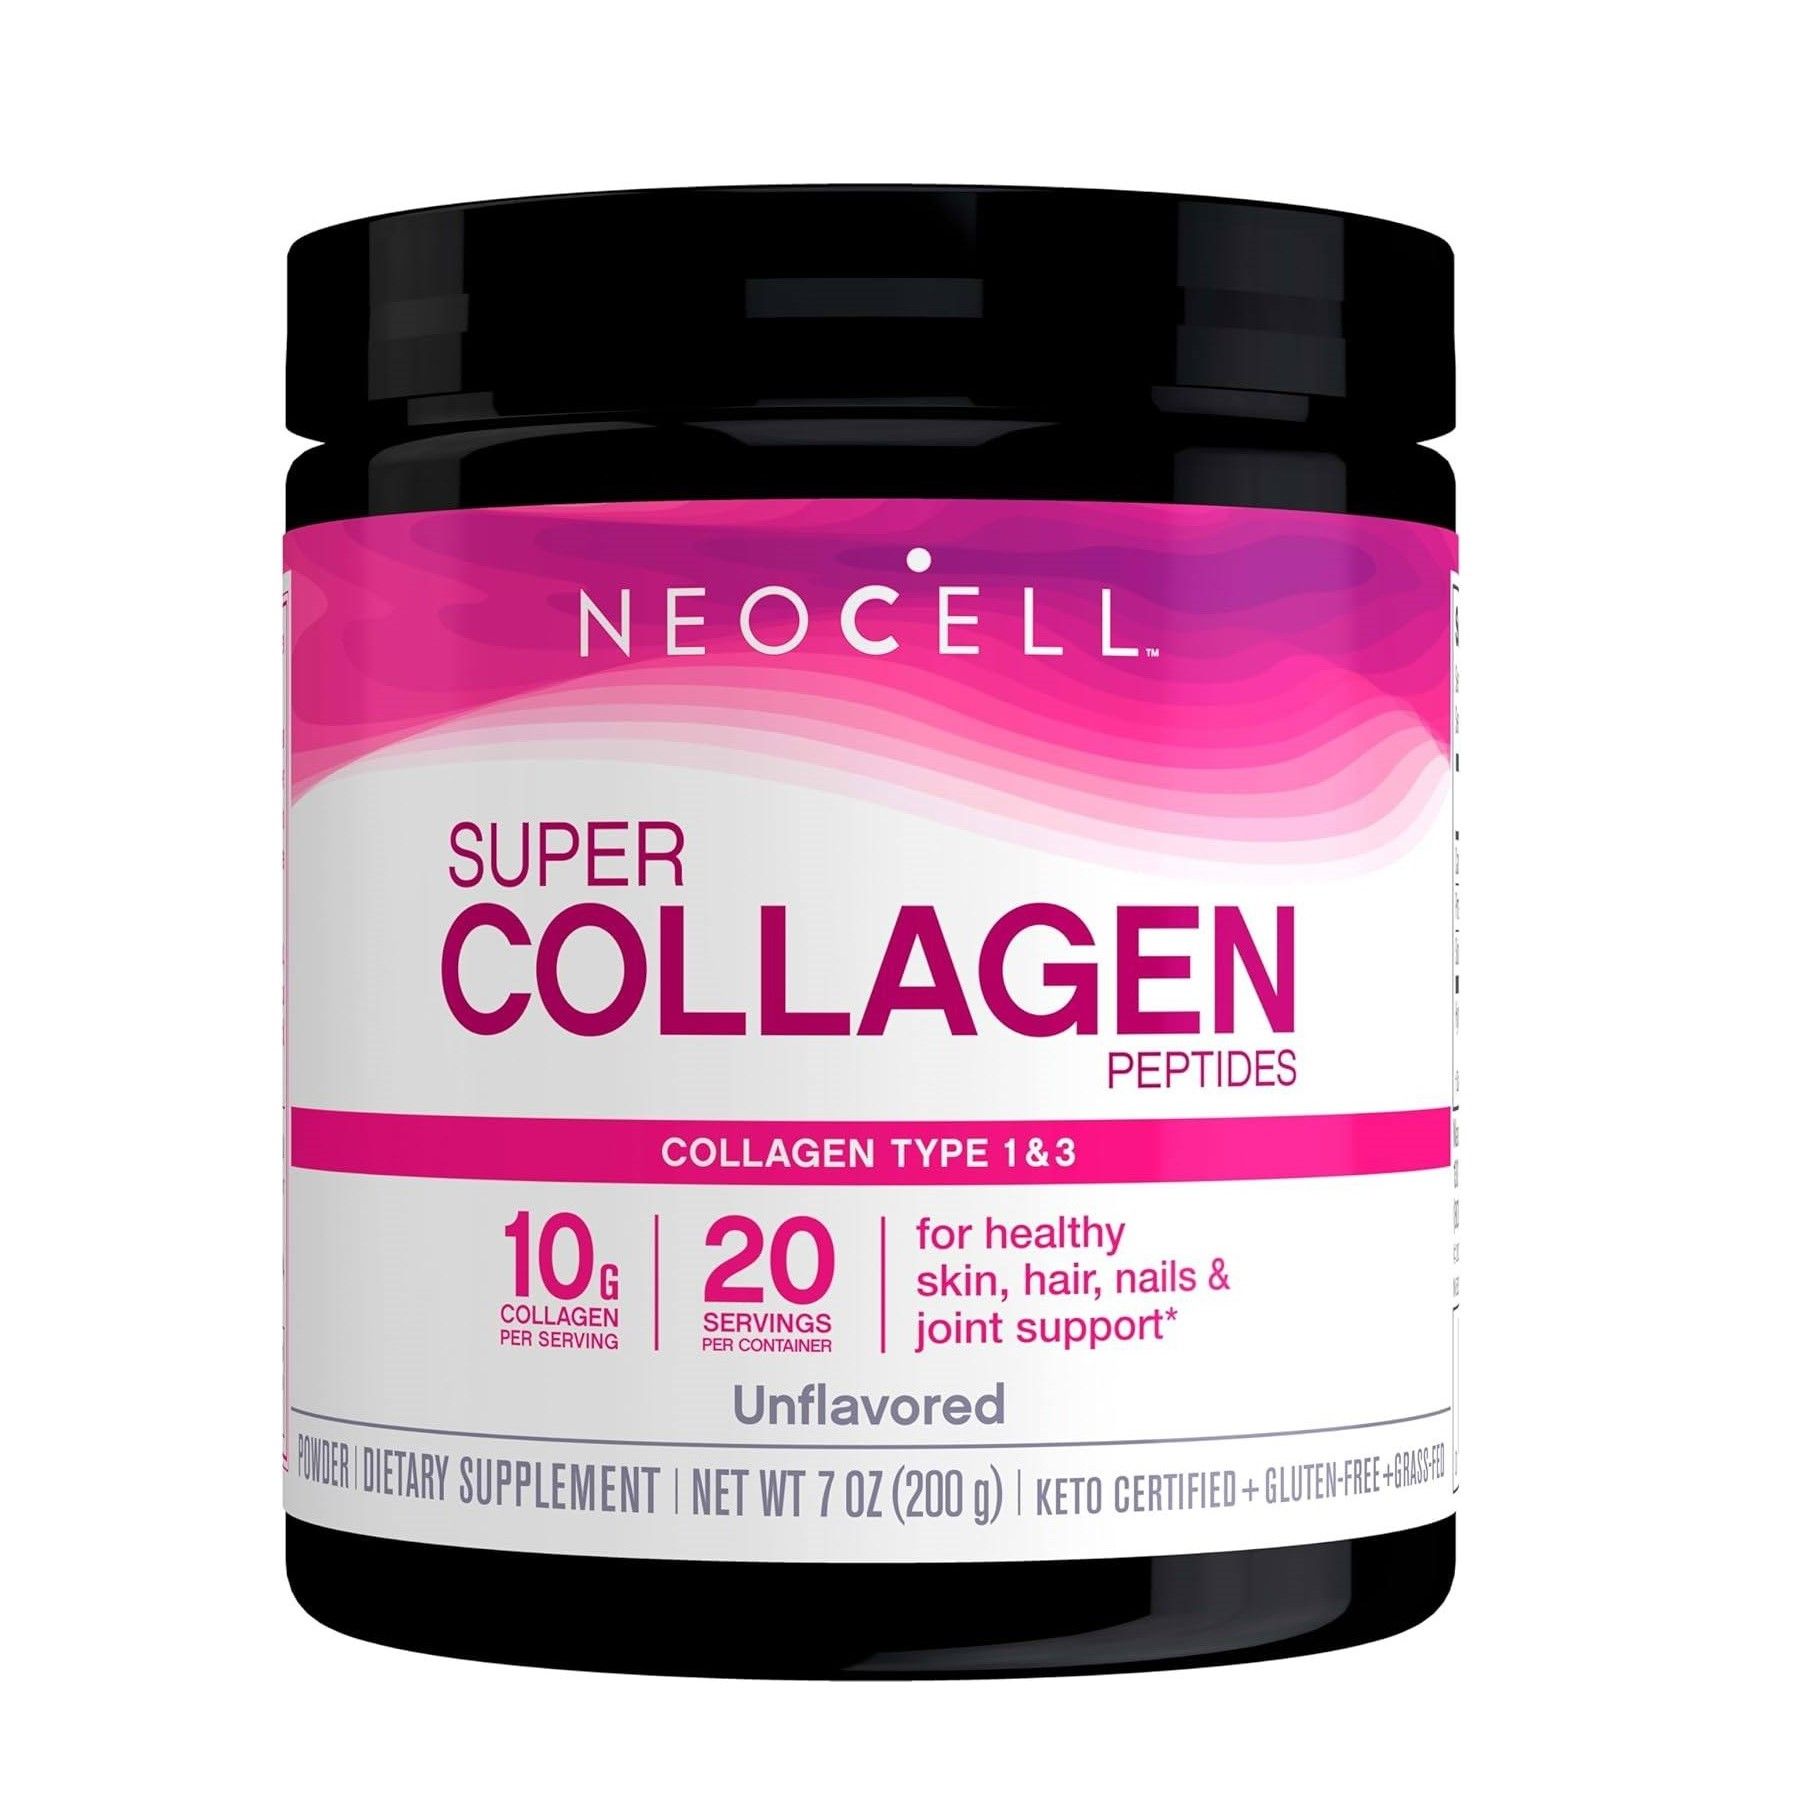 NeoCell Super Collagen Peptides Collagen Type 1 & 3 For Healthy Skin,Hair,Nails & Joint Support 200gm  